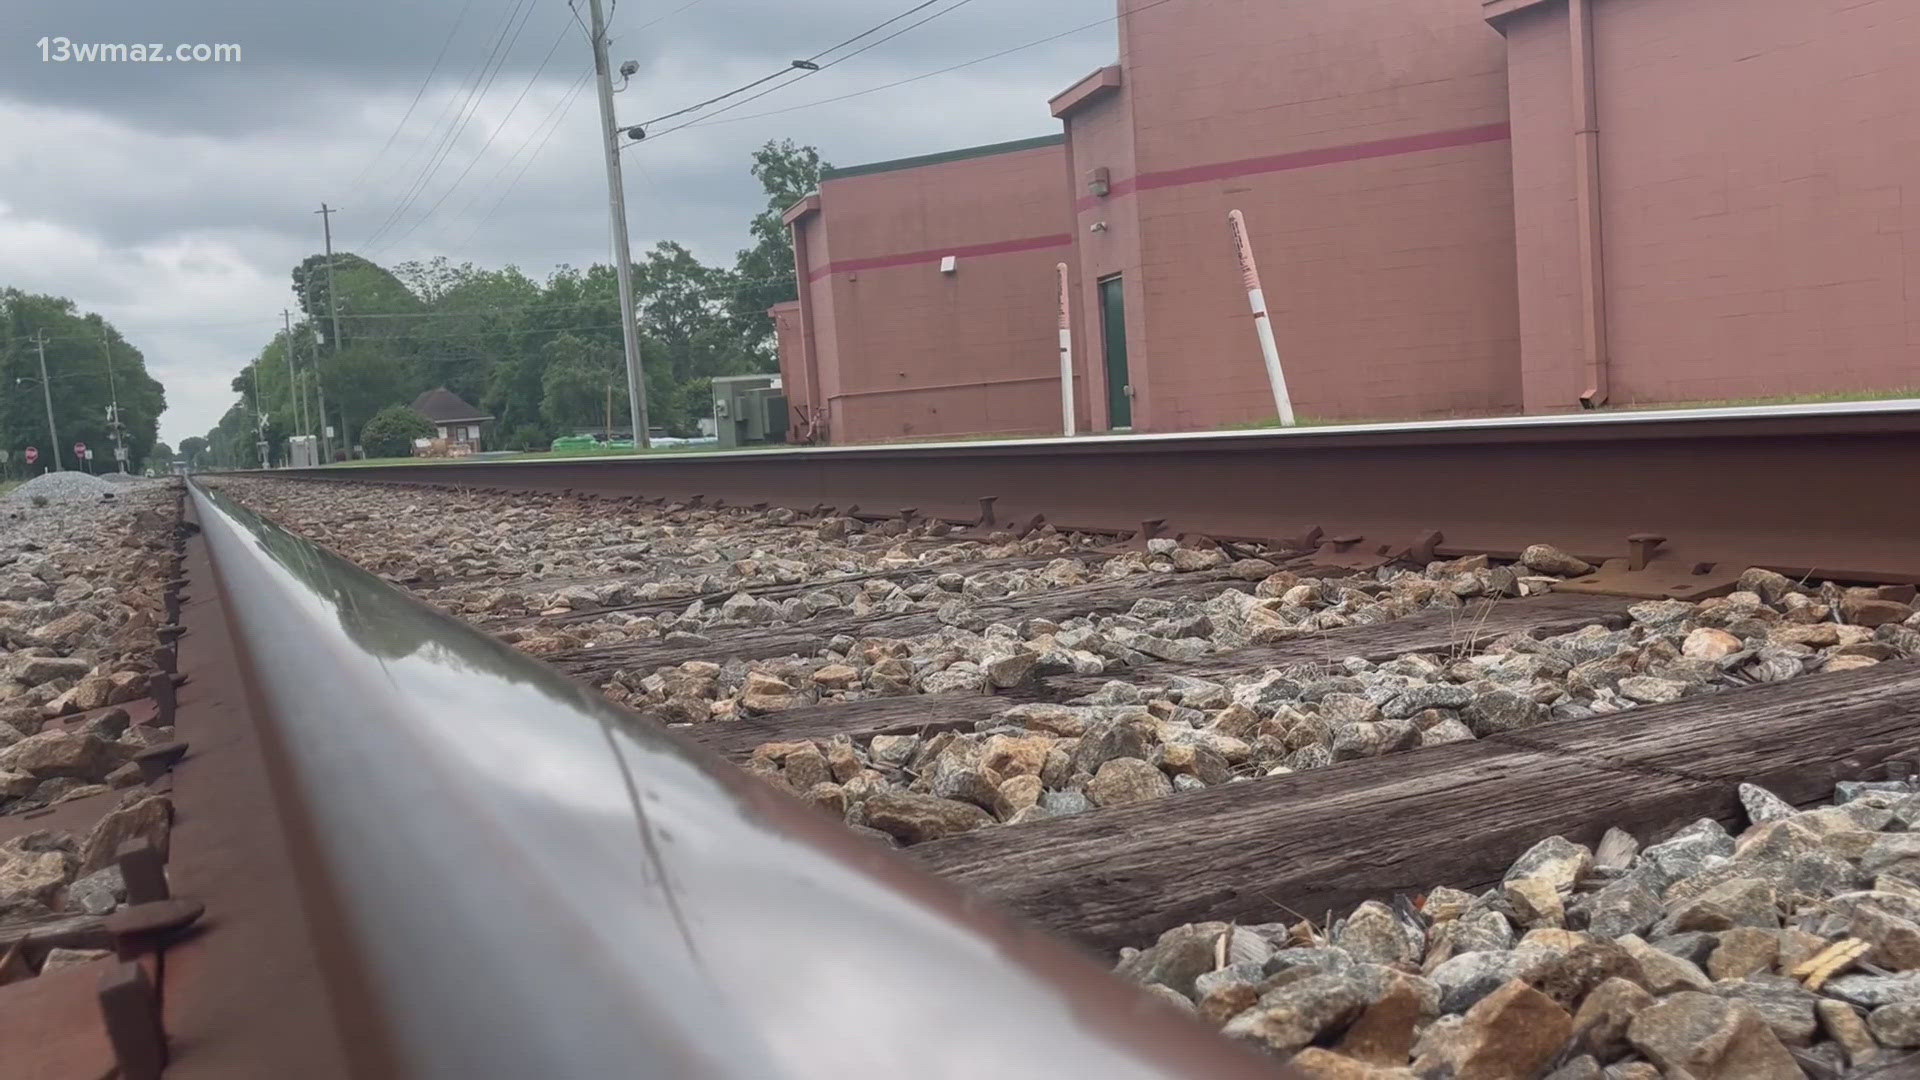 The state department of transportation is in the planning process to connect the rail lines from Atlanta to Savannah.